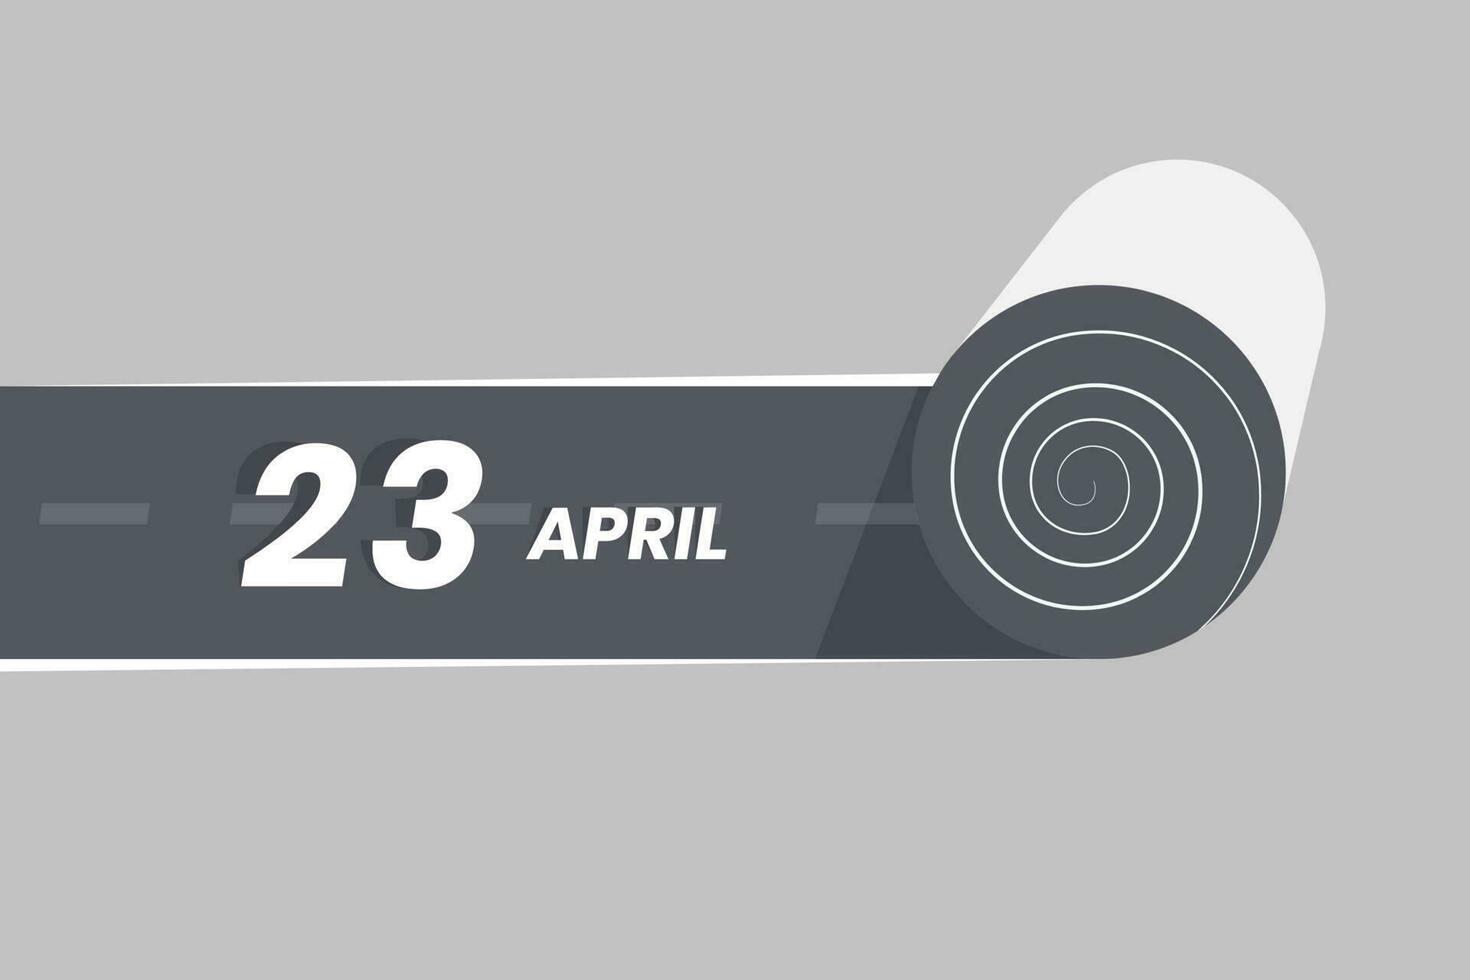 April 23 calendar icon rolling inside the road. 23 April Date Month icon vector illustrator.